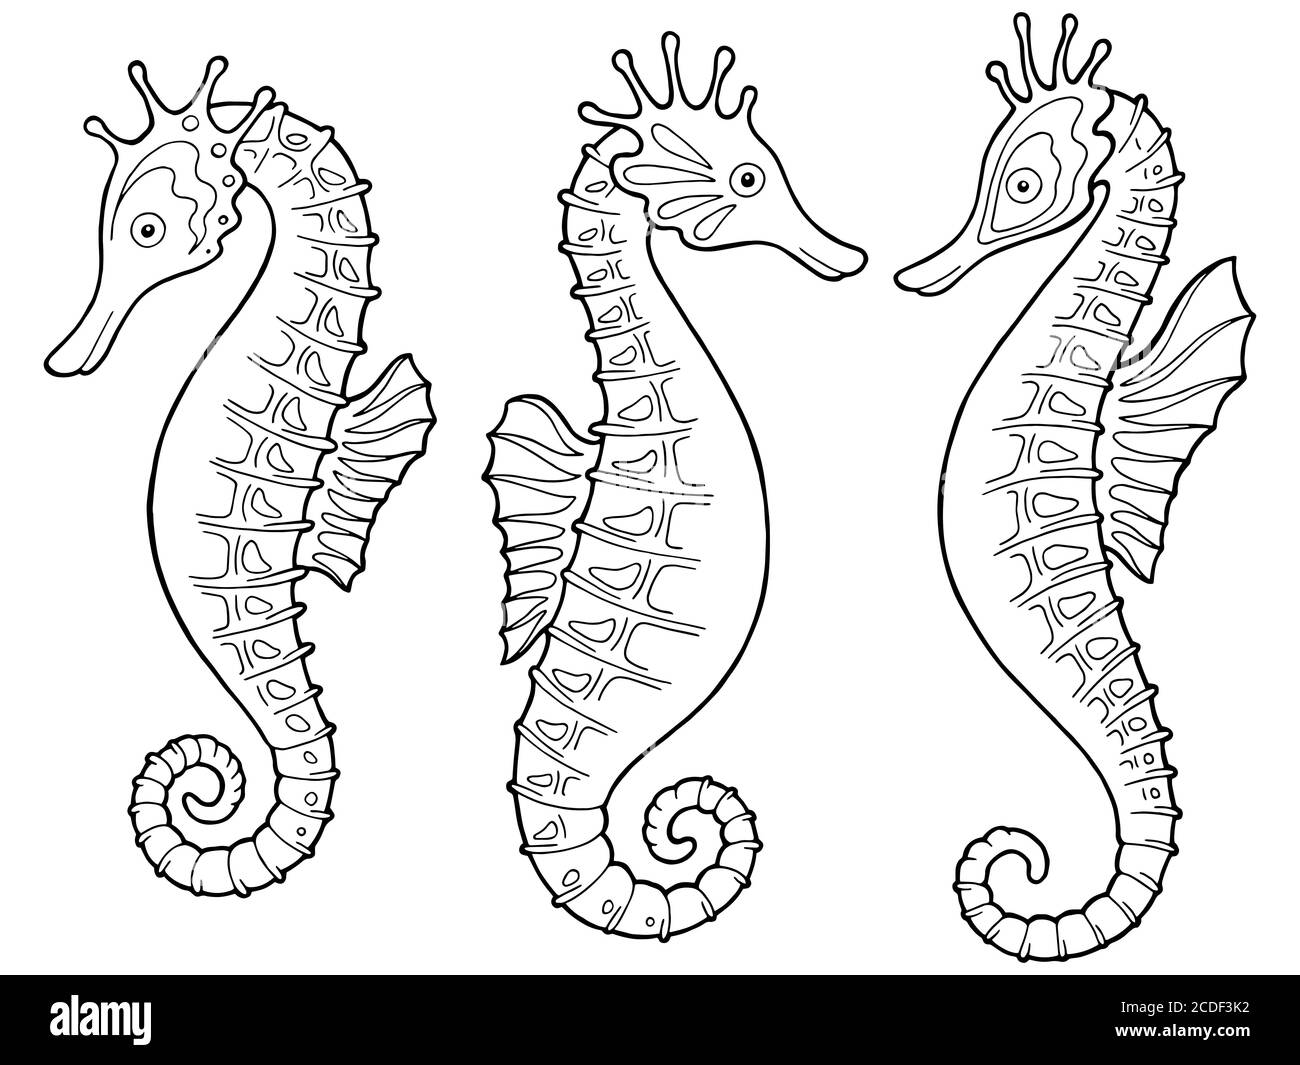 Sea horse graphic black white isolated sketch set illustration vector Stock Vector